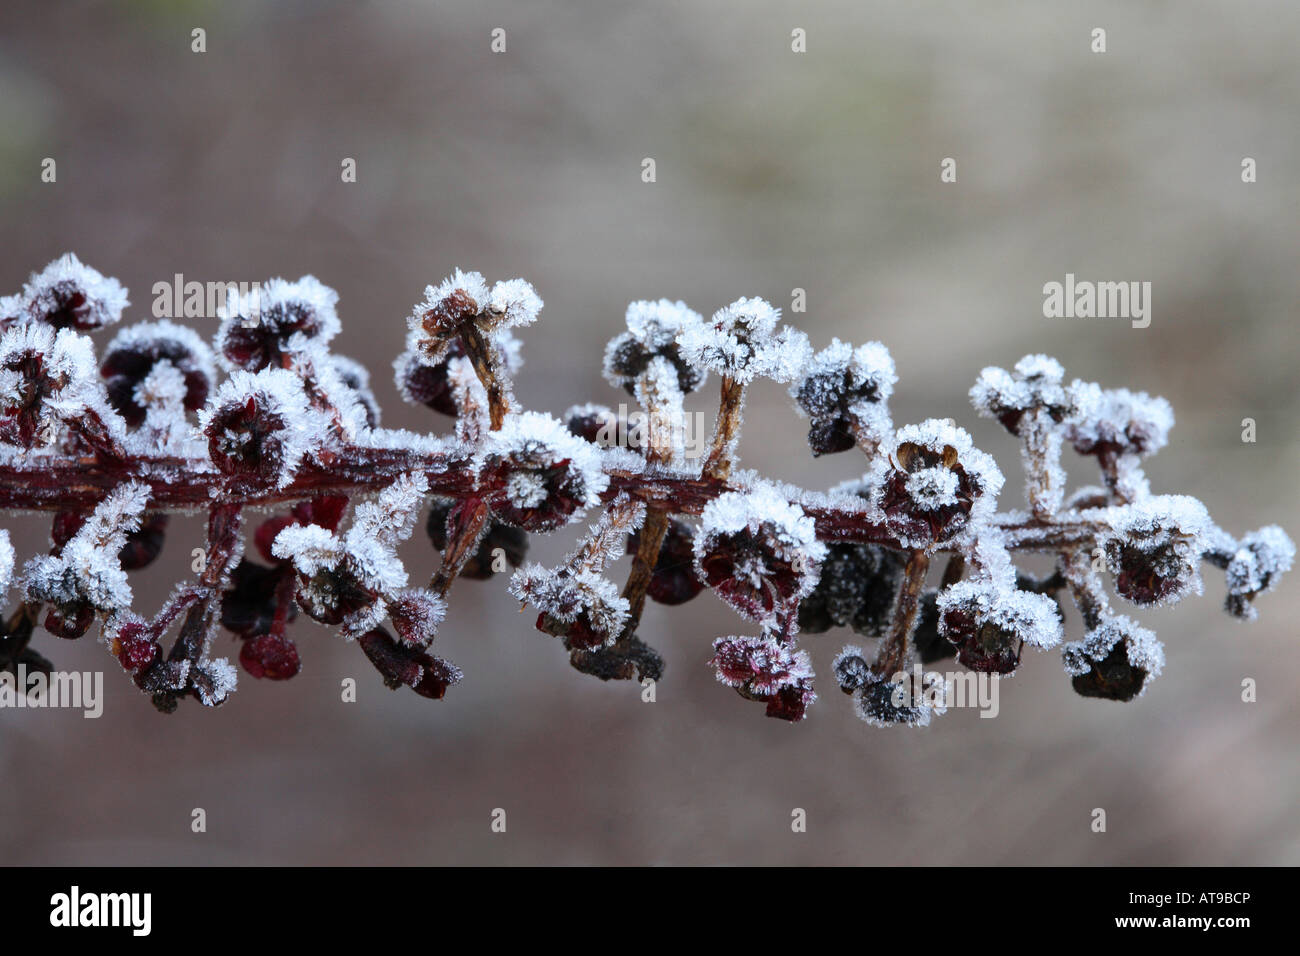 Spike of Pokeweed flowers Five petaled flowers completely covered in thick layer of small icicles Stock Photo